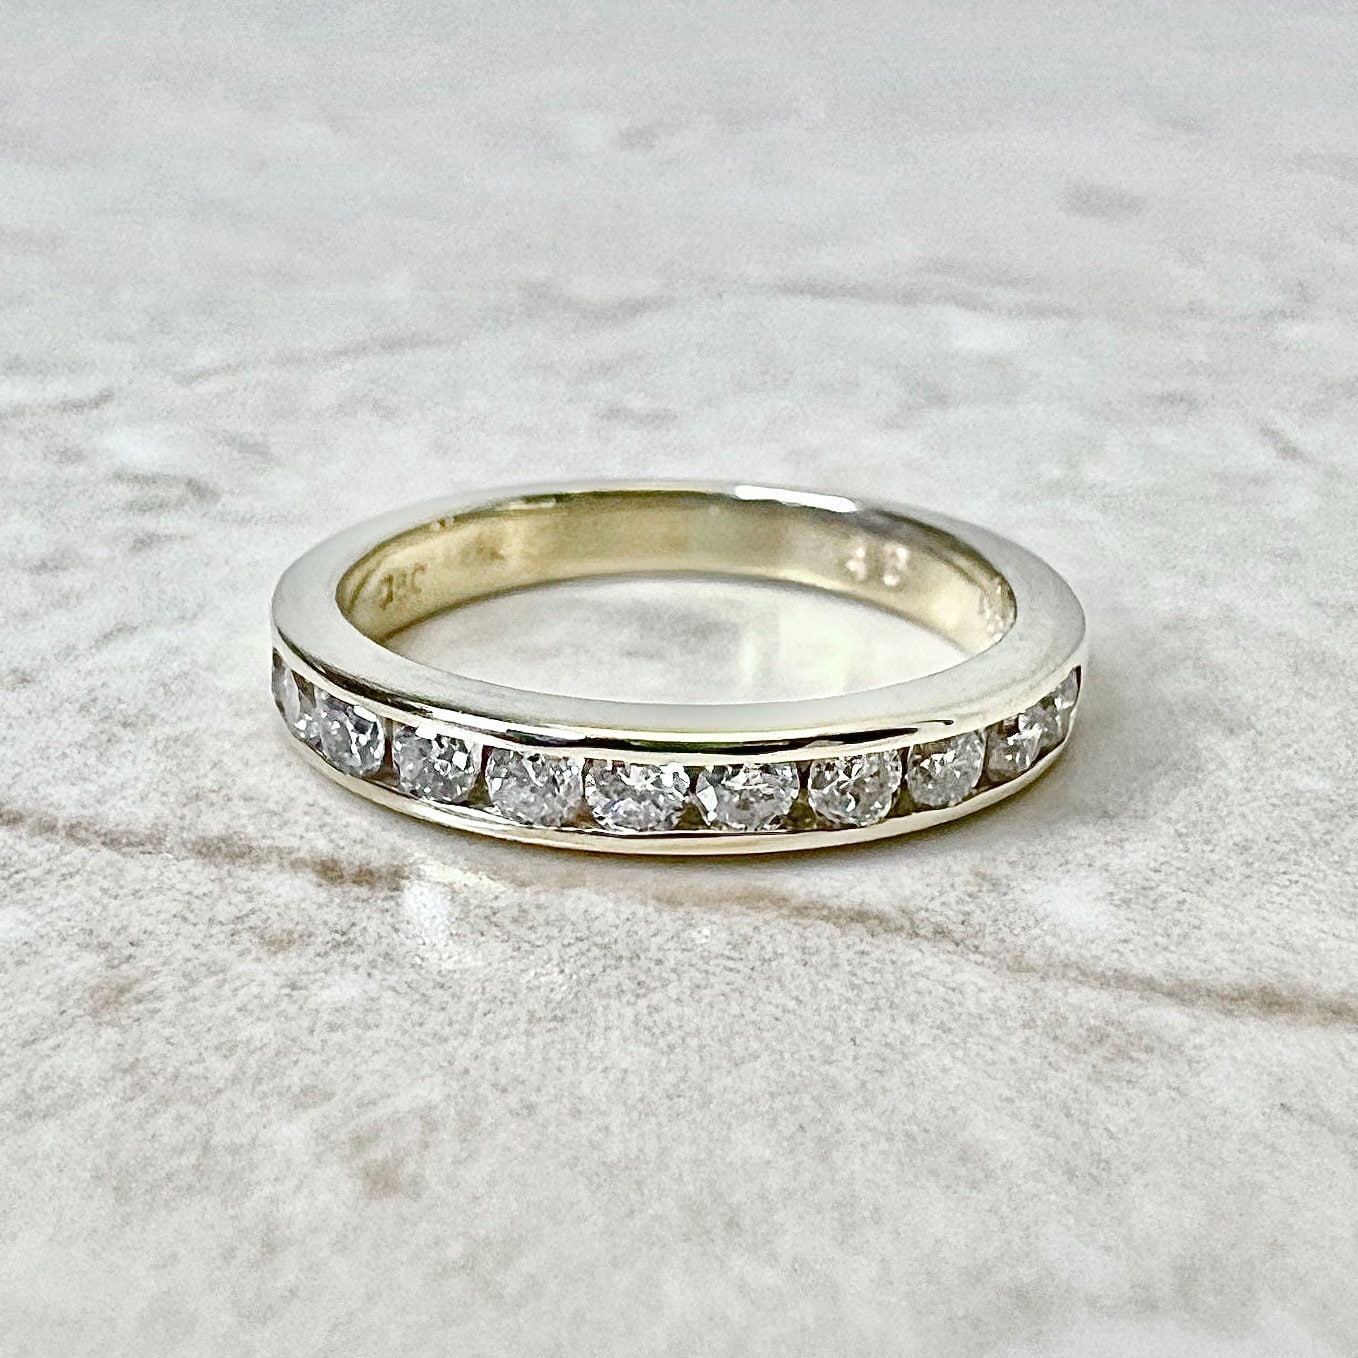 14K Half Eternity Diamond Band Ring 0.30 CTTW - Yellow Gold Eternity Ring - Anniversary Ring - Wedding Ring - Size 4.75 US - Holiday Gift